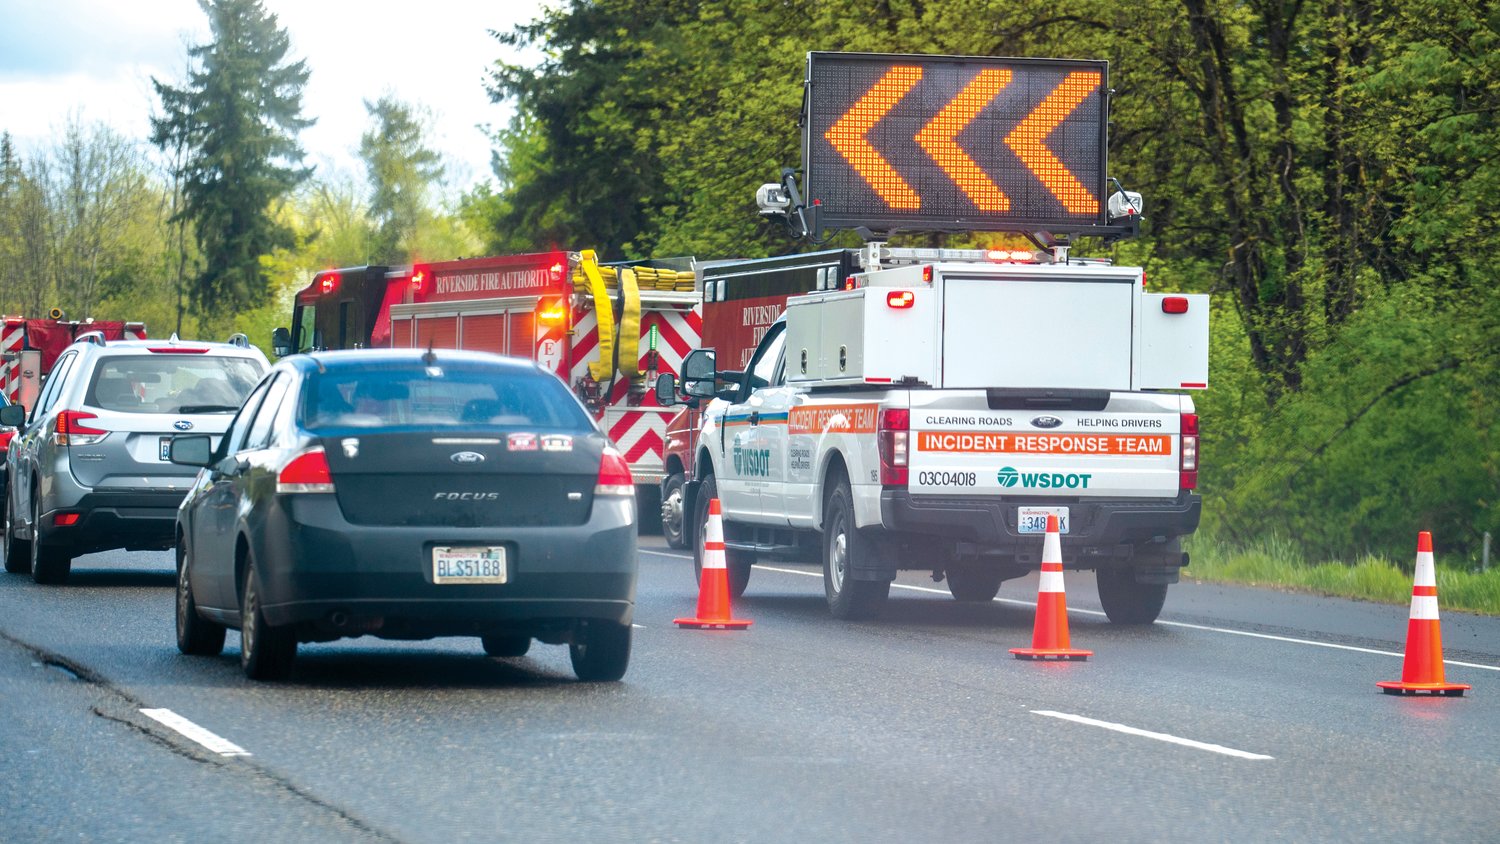 Members of the WSDOT Incident Response Team block one lane of Interstate 5 as ambulance crews and fire engines respond to a car fire in the southbound lane of Interstate 5 near milepost 86 in Grand Mound on Tuesday.